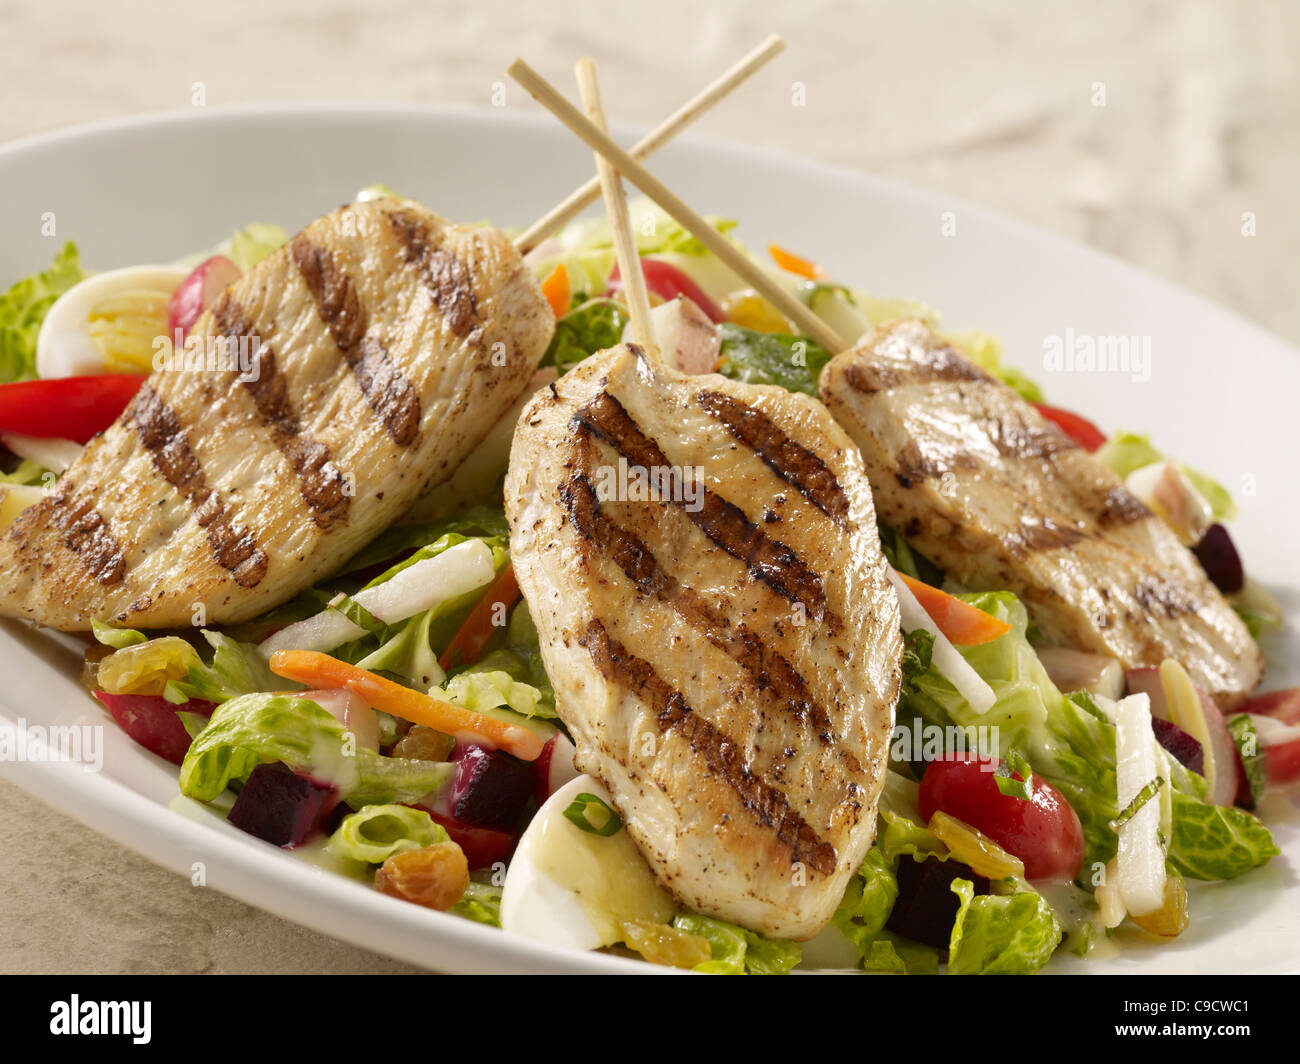 Grilled chicken salad with lettuce, egg, carrot, tomato and onion with dressing Stock Photo